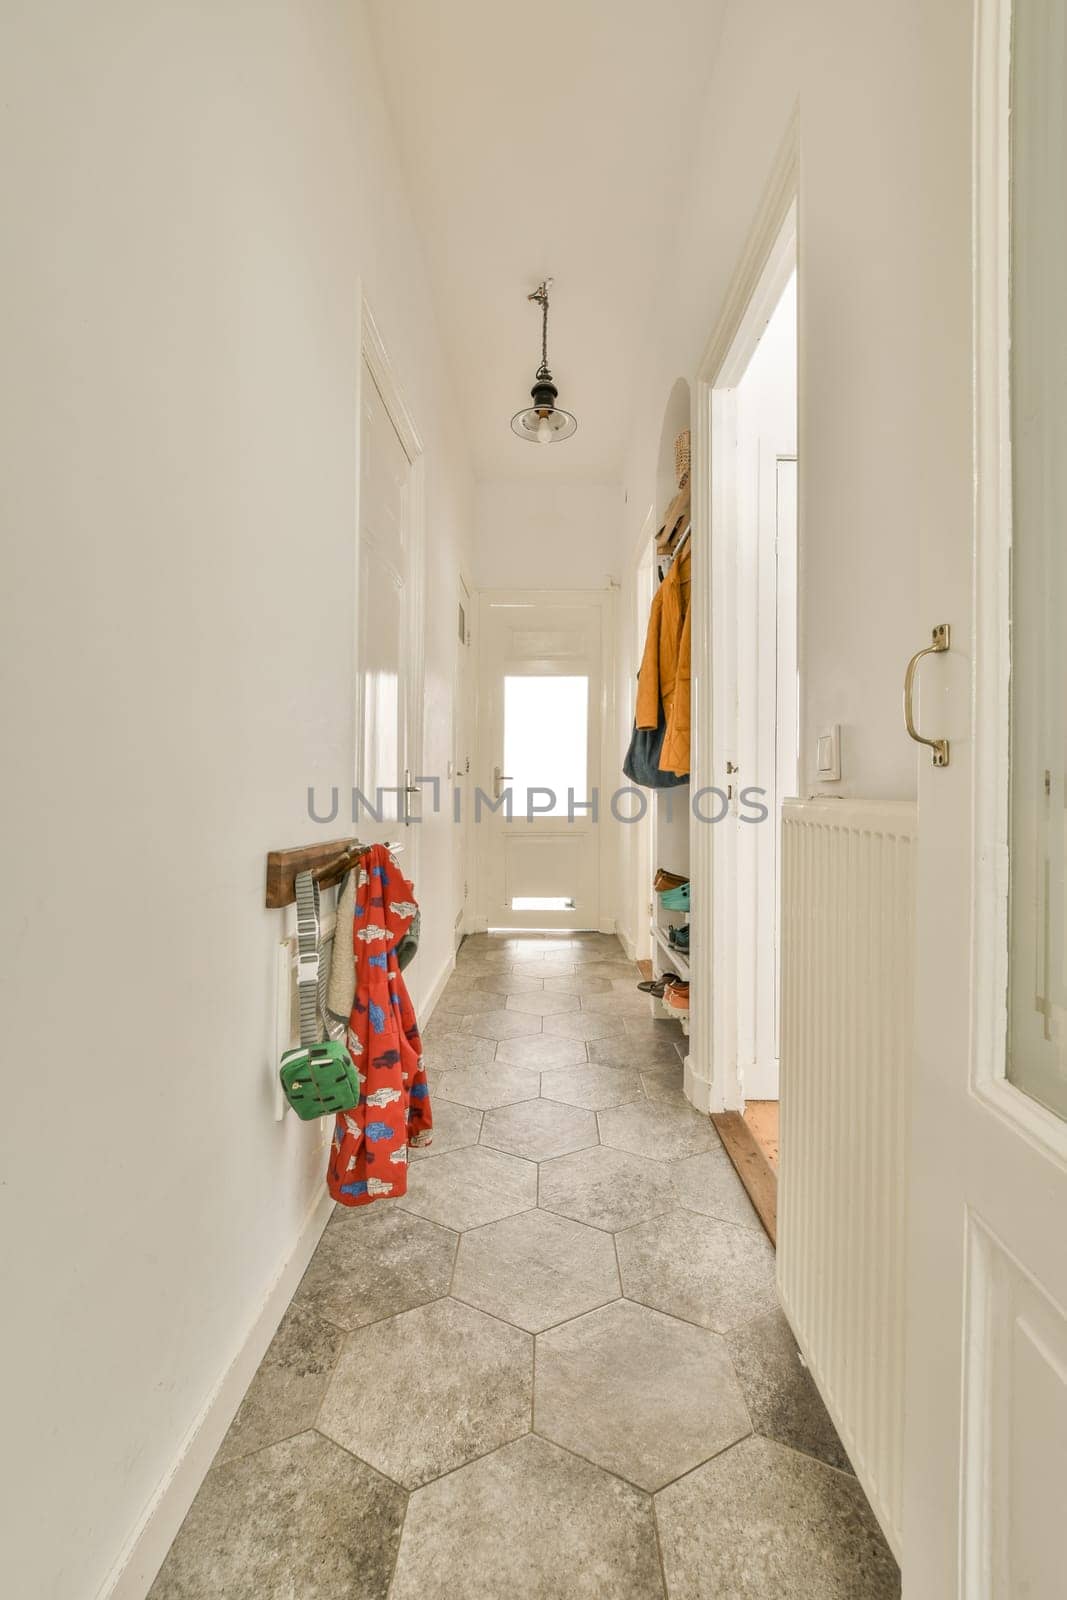 a long hallway with white walls and grey tiles on the floor, there is an open door leading to another room